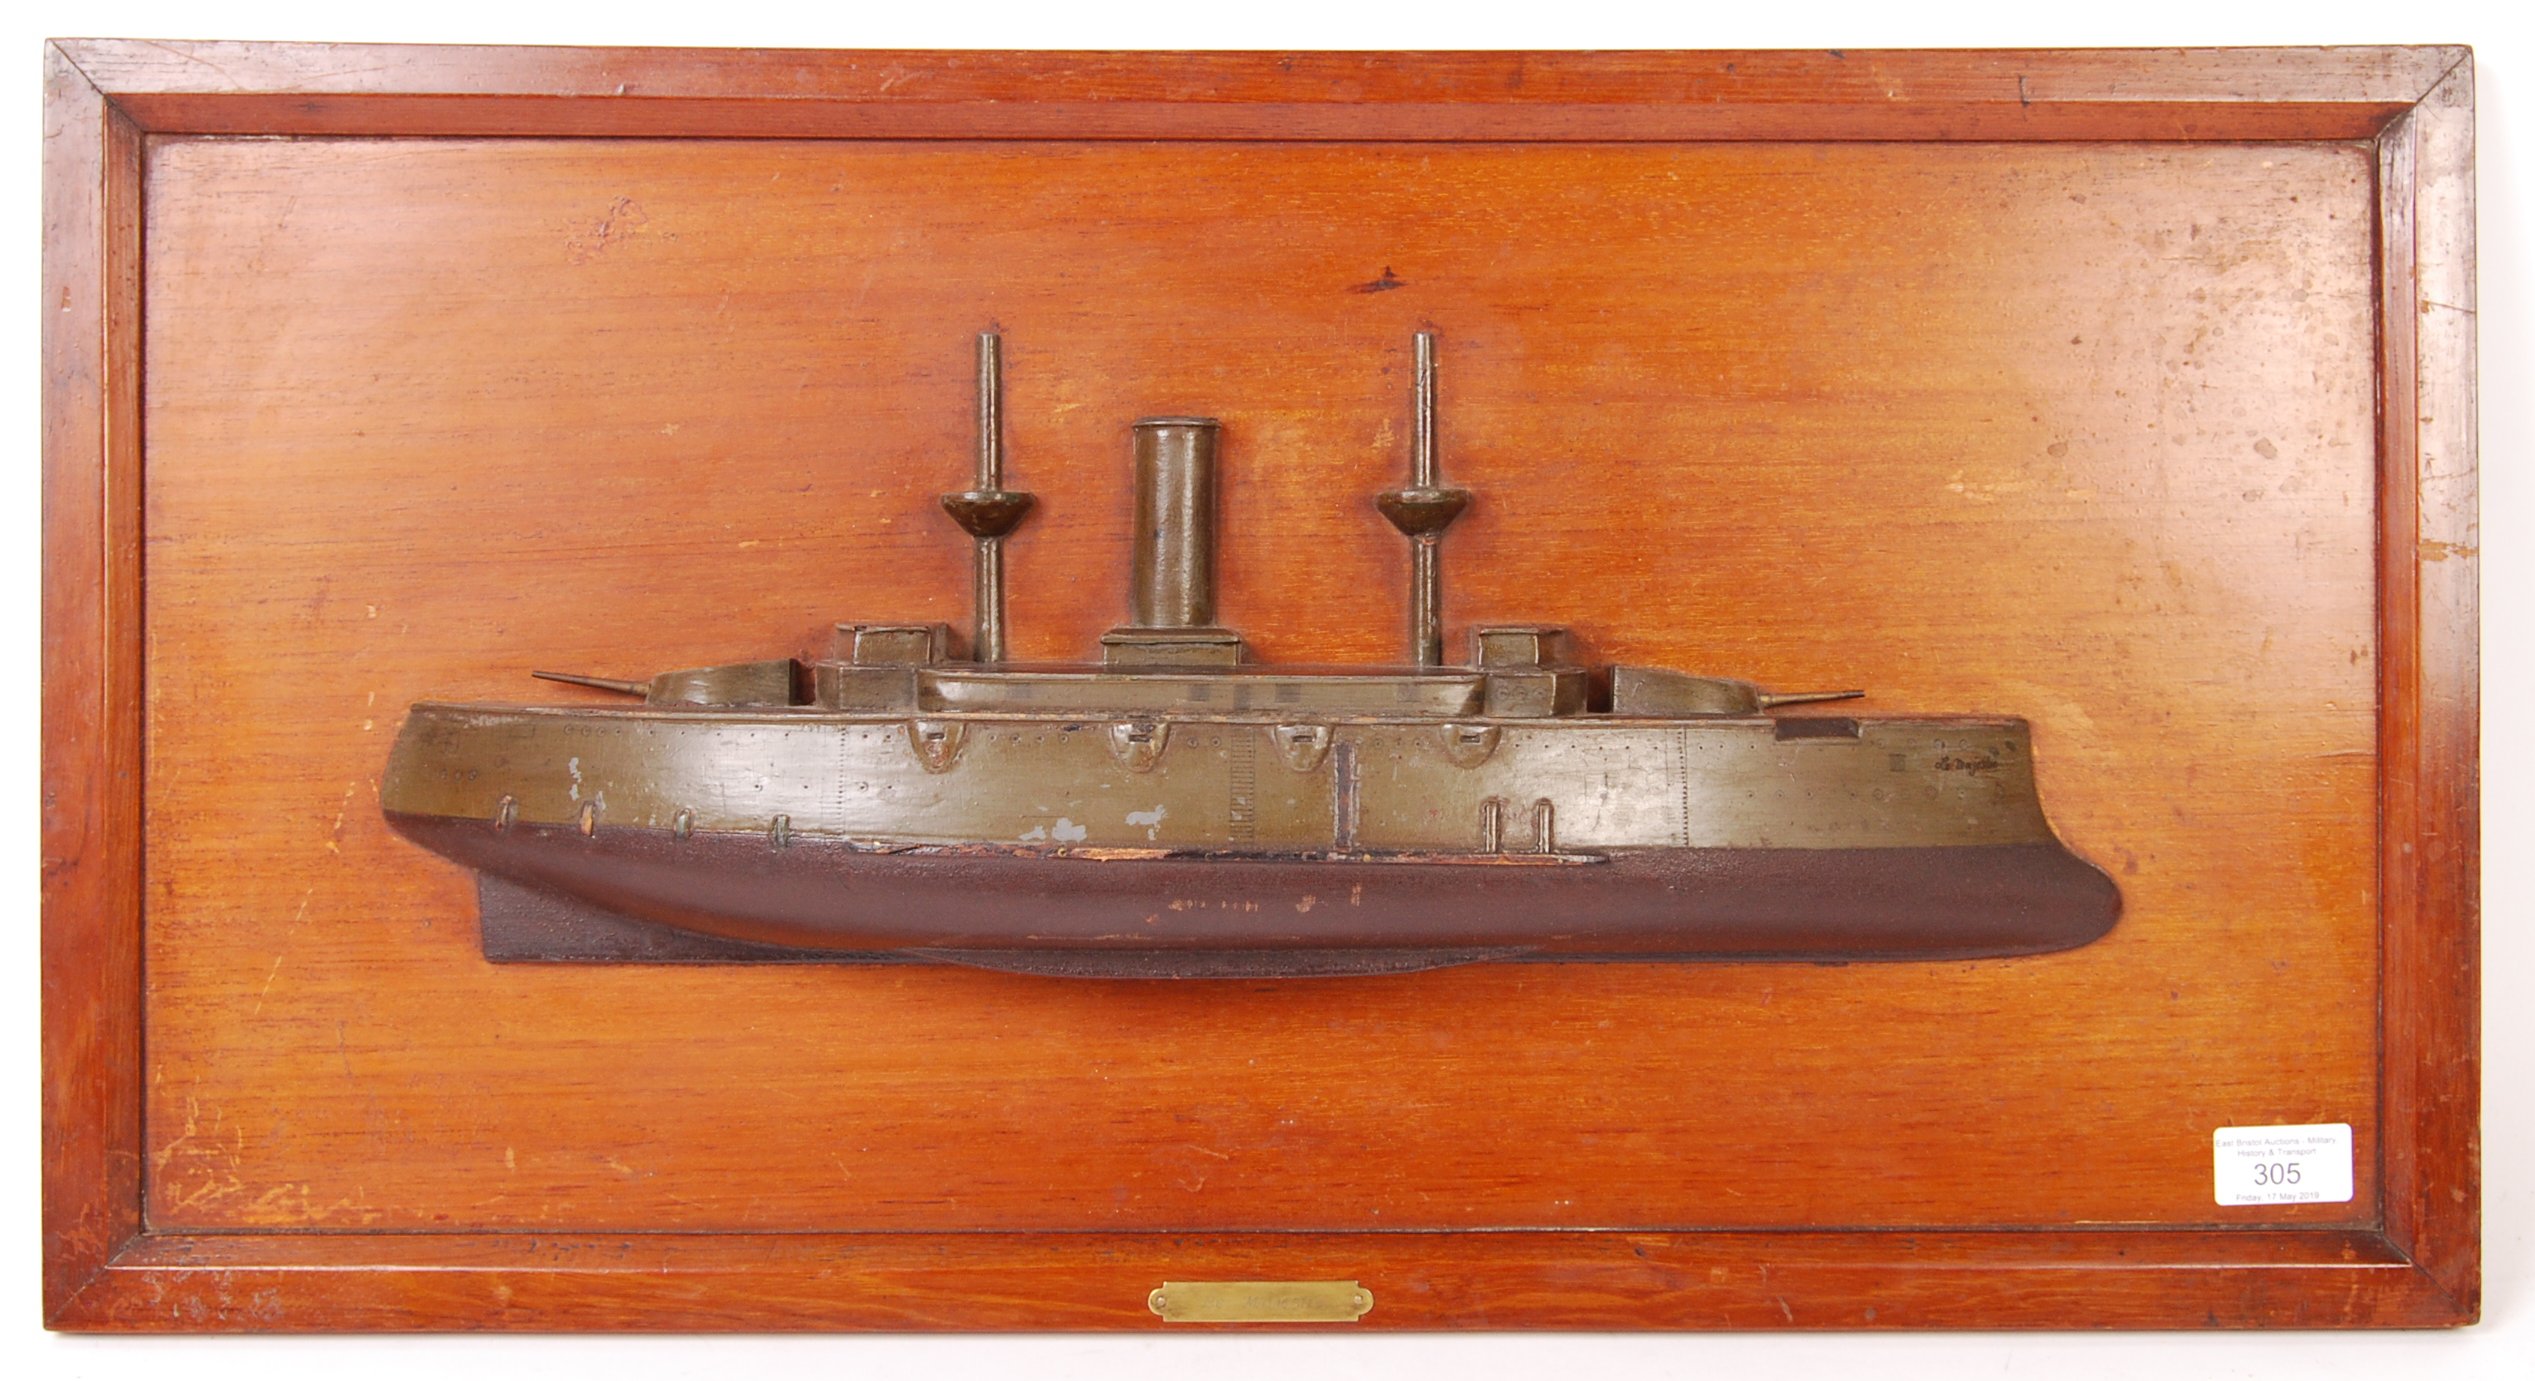 RARE WWI FRENCH HALF BLOCK MODEL OF AN IRONCLAD BATTERY